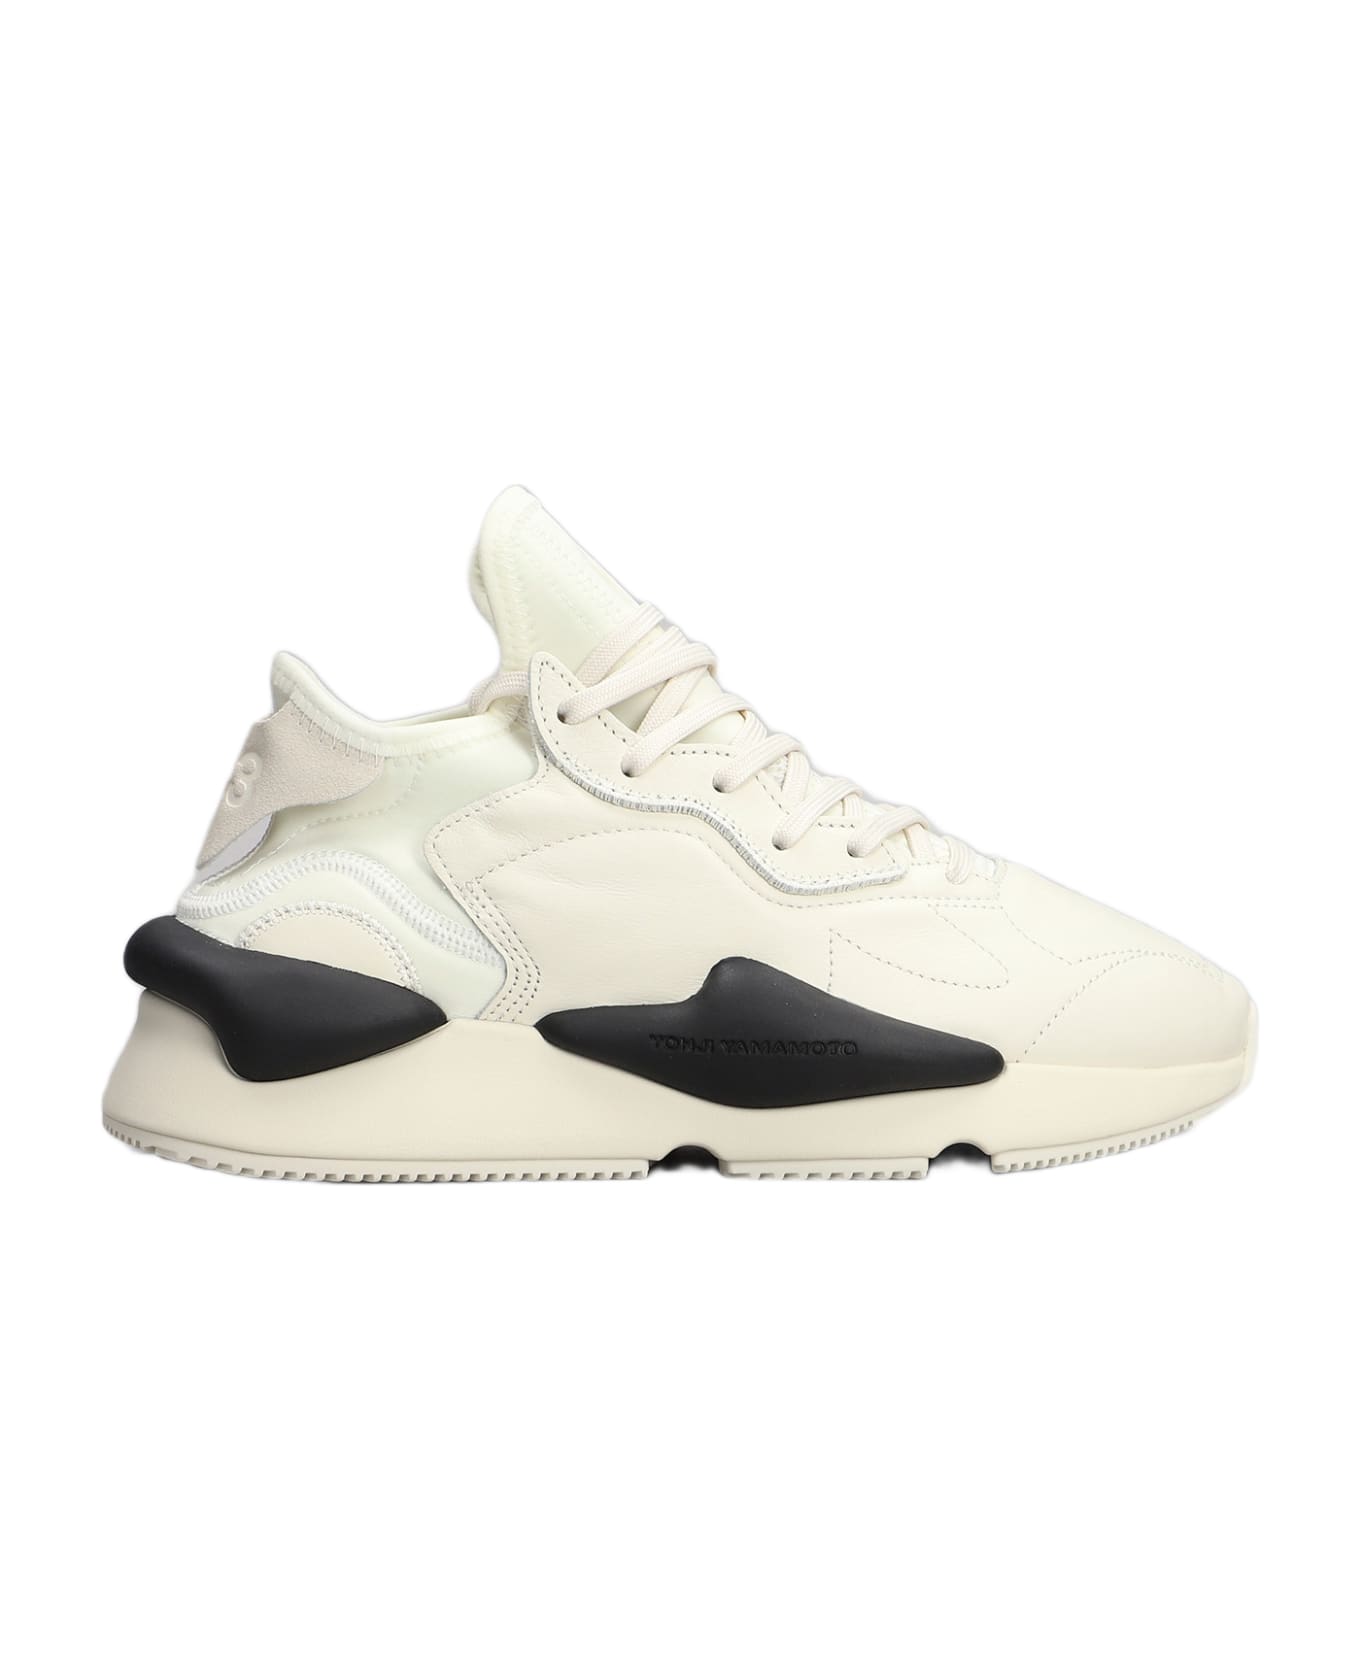 Y-3 Kaiwa Sneakers In Beige Leather - WHITE